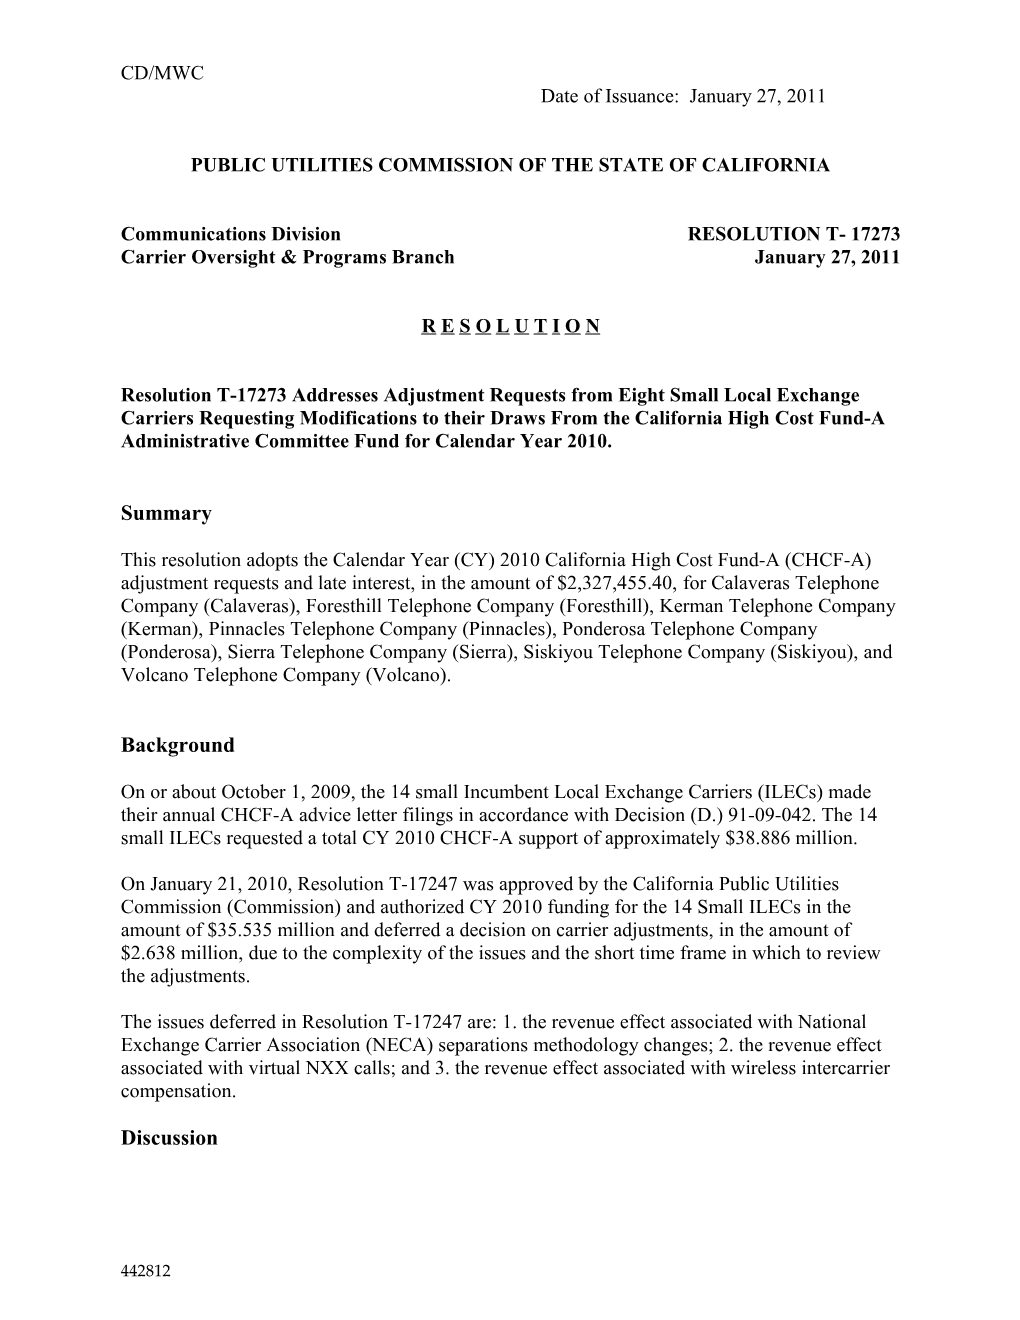 Public Utilities Commission of the State of California s55